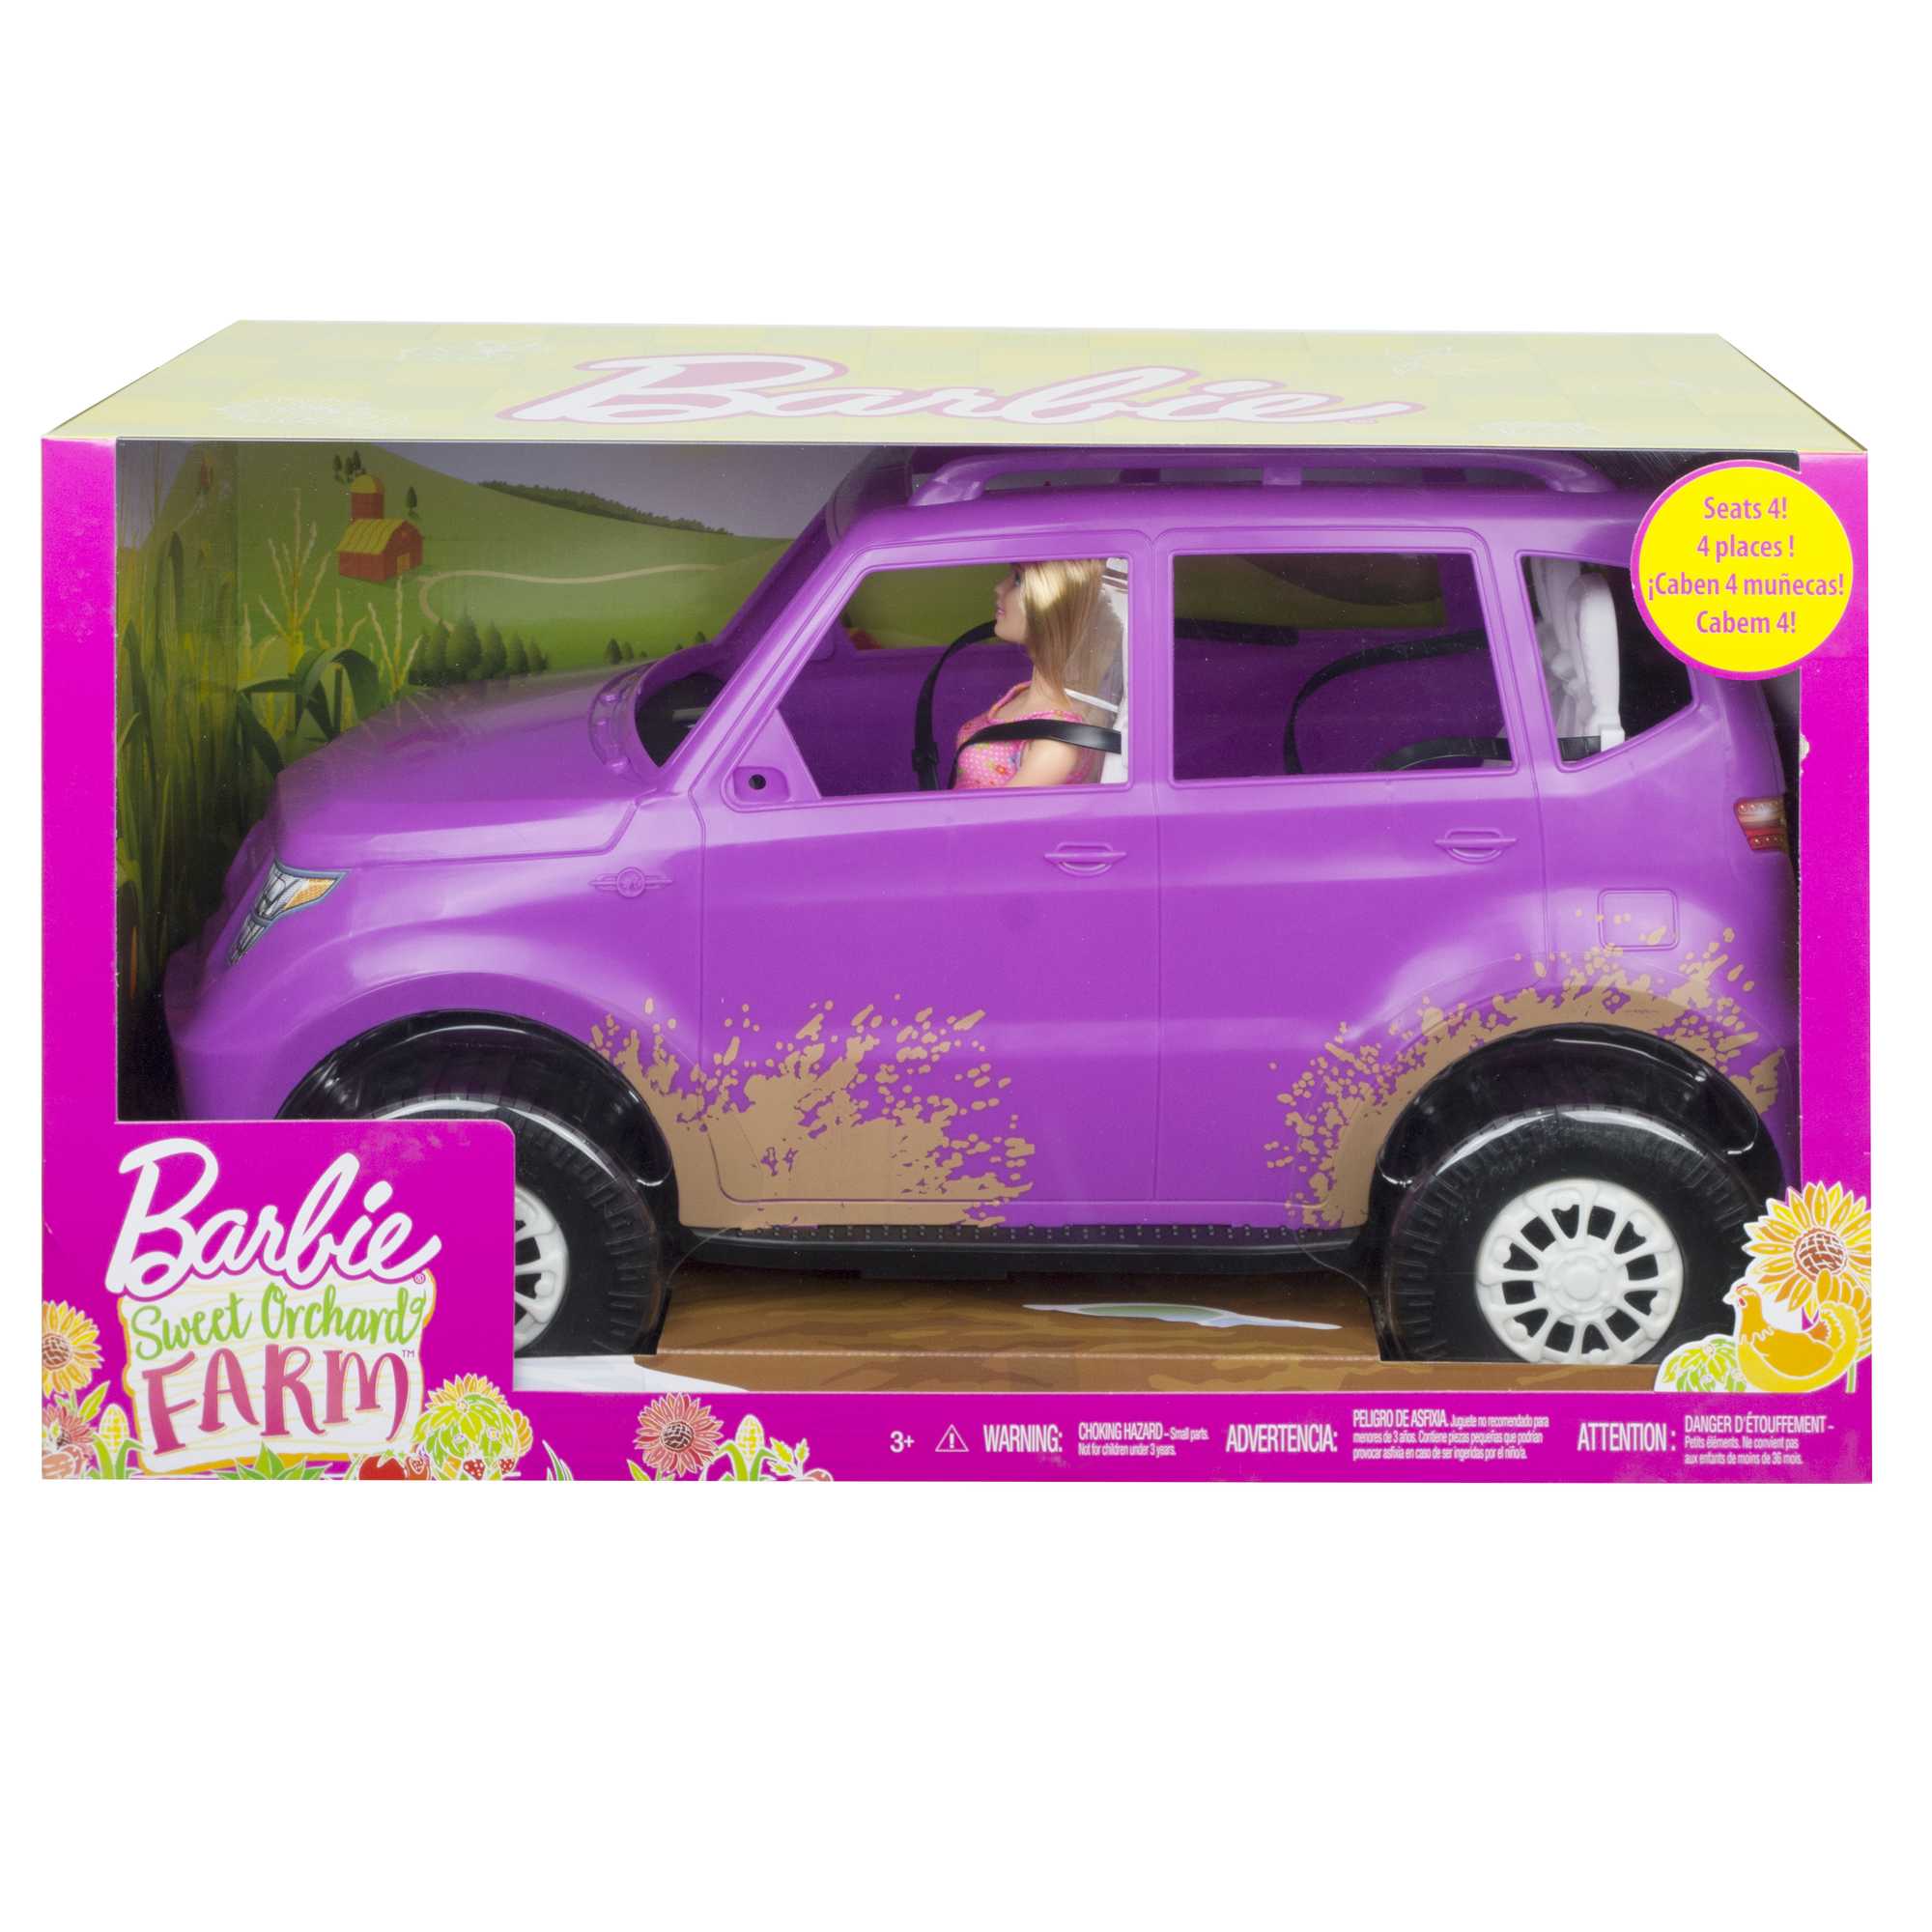 Barbie Doll and Vehicle | Mattel